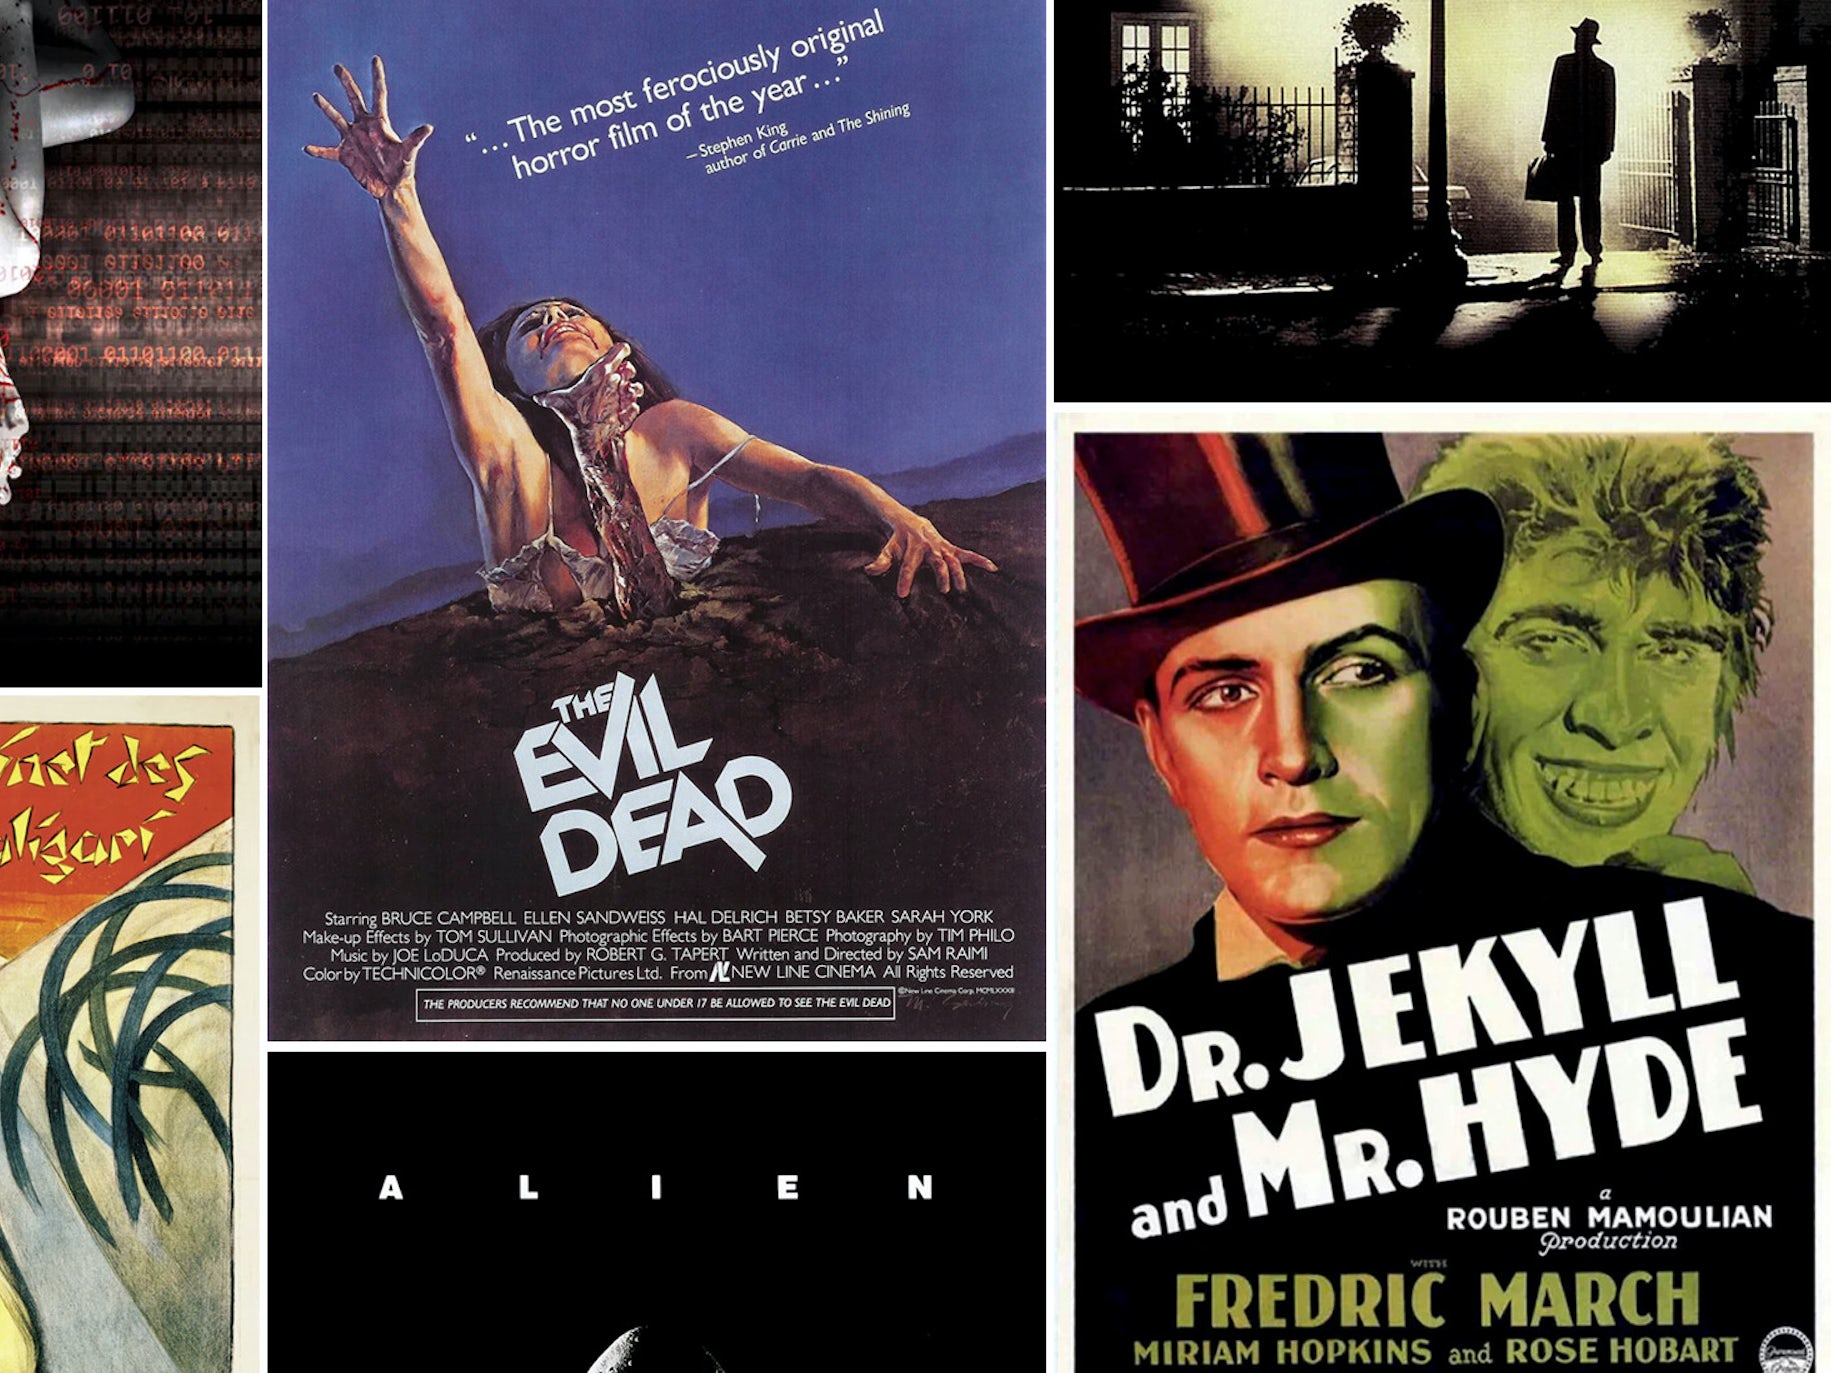 horror movie posters so good it's scary